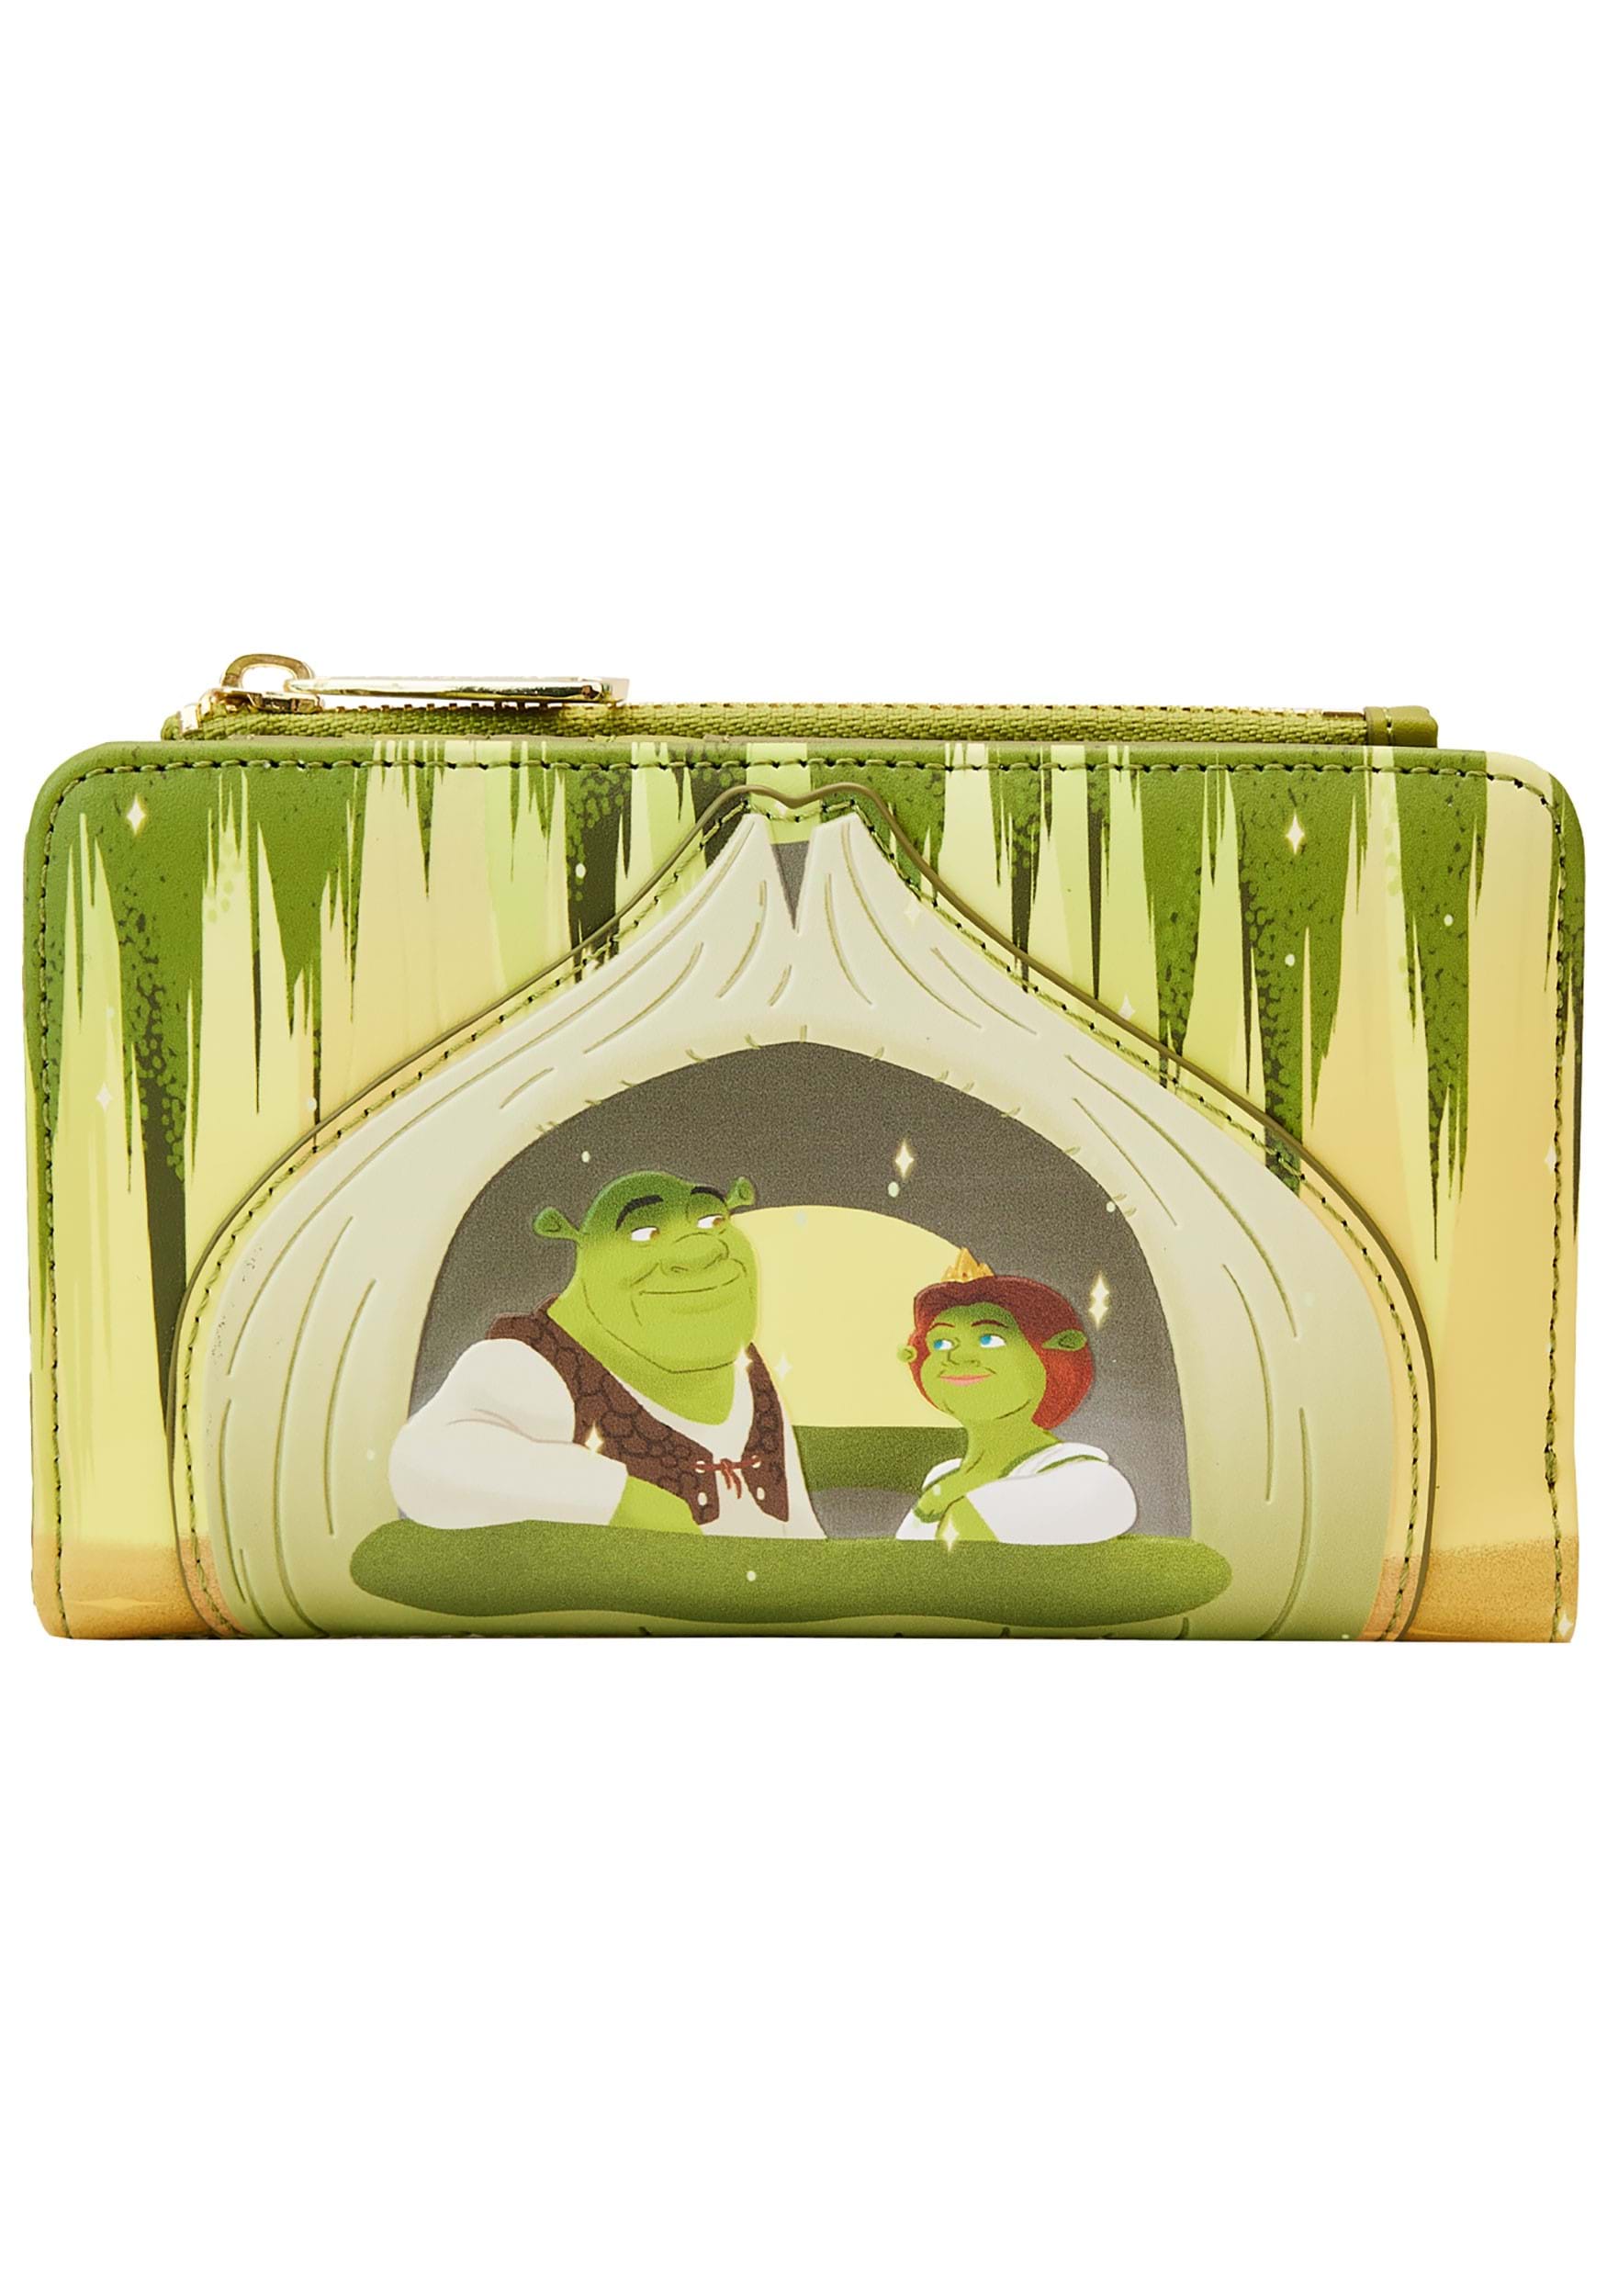 Dreamworks Shrek Happily Ever After Loungefly Flap Wallet